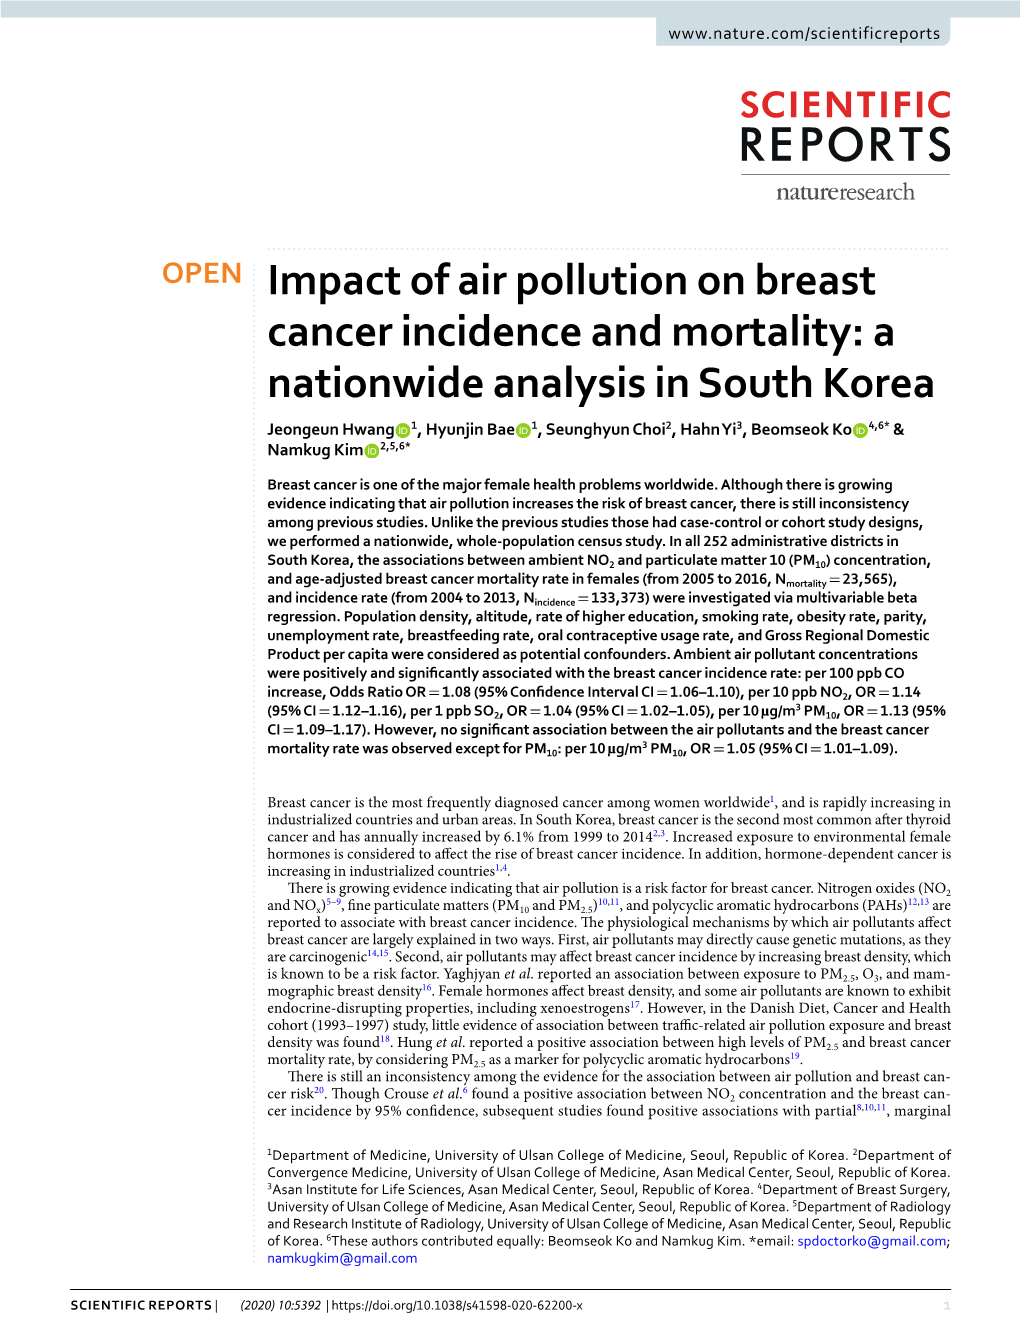 Impact of Air Pollution on Breast Cancer Incidence And